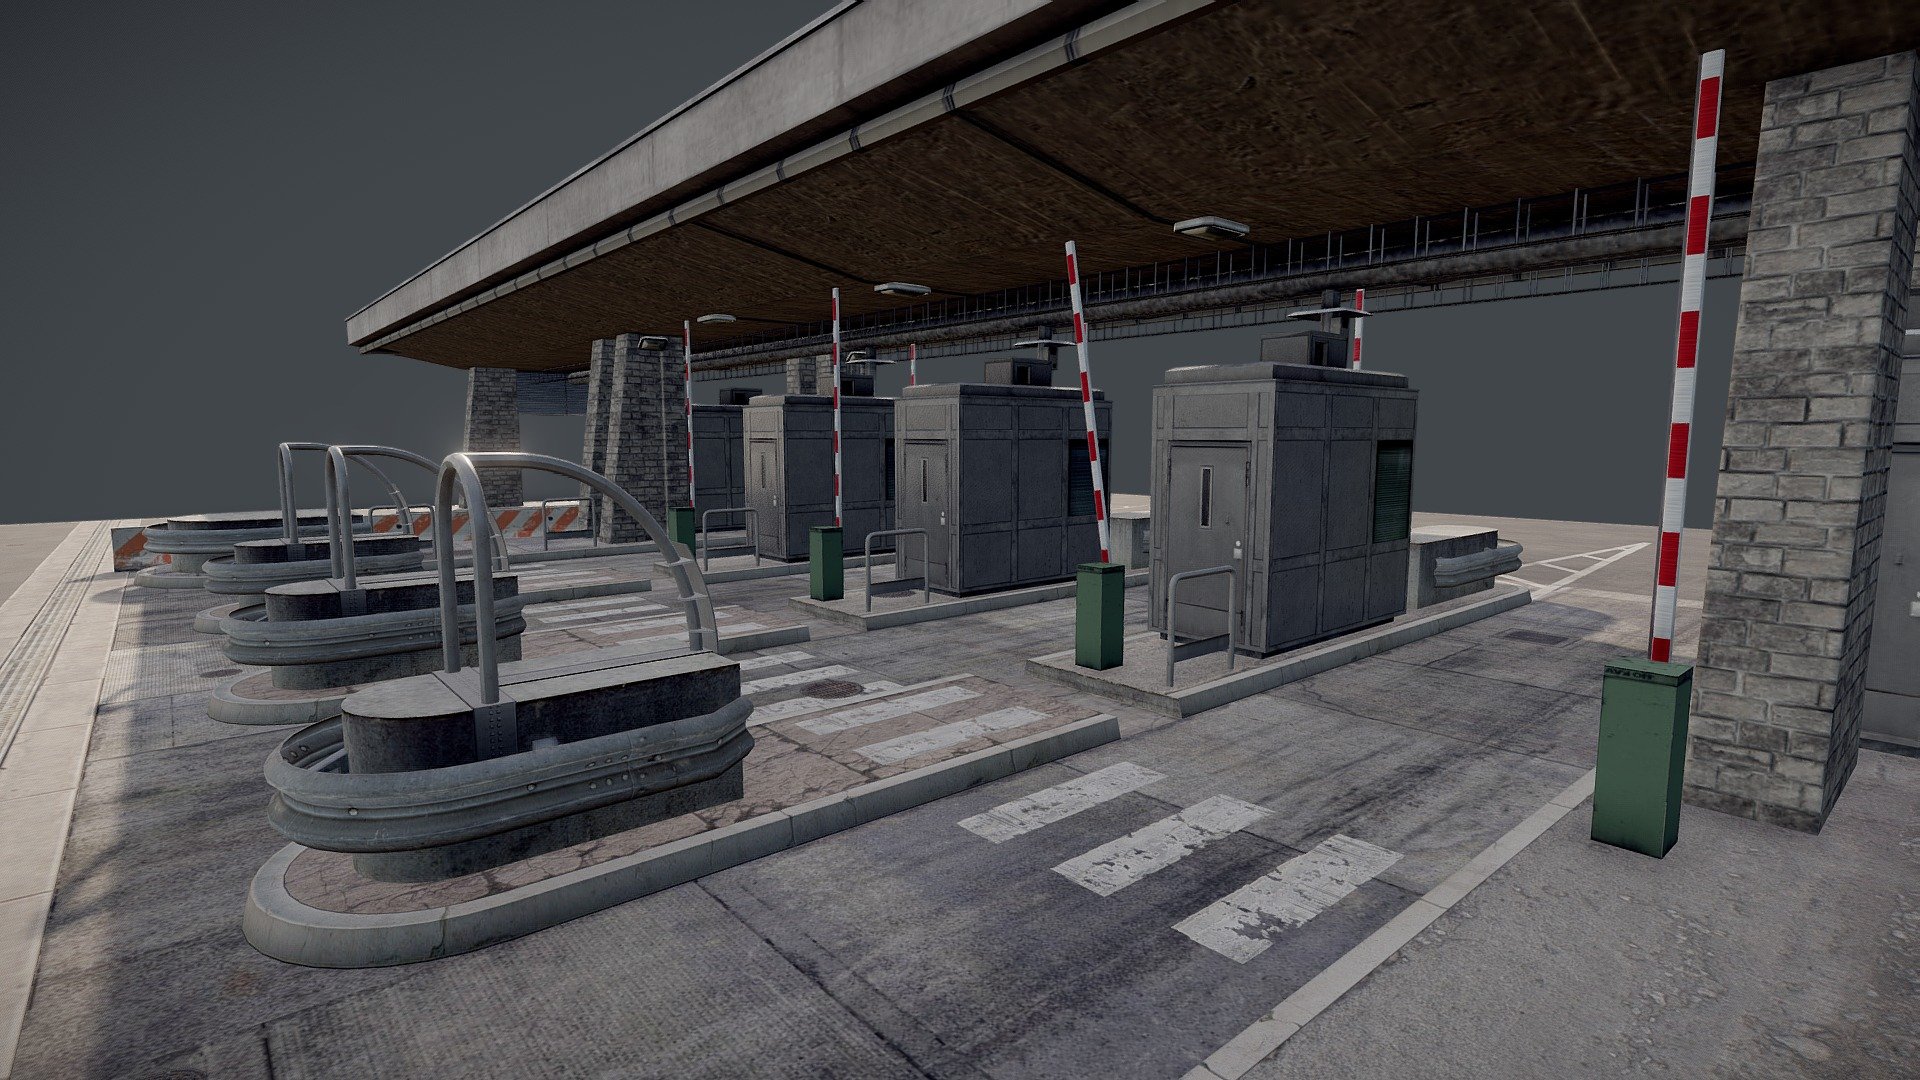 Tun. du Mont-Blanc, 74400 Chamonix-Mont-Blanc, France

A detailed recreation of a toll booth in Mont-Blance. 

Scene Information:




Modelled in Blender 3.3.2

Fully UV unwrapped

All materials are allocated to their respective objects.

All meshes are named accordingly 

Textures Included:




1k/2k fully PBR materials

PBR trimsheets for roads, sidewalks and curbs

Formats:




.obj 

.blend 

.fbx

Enjoy and have a nice day 3d model